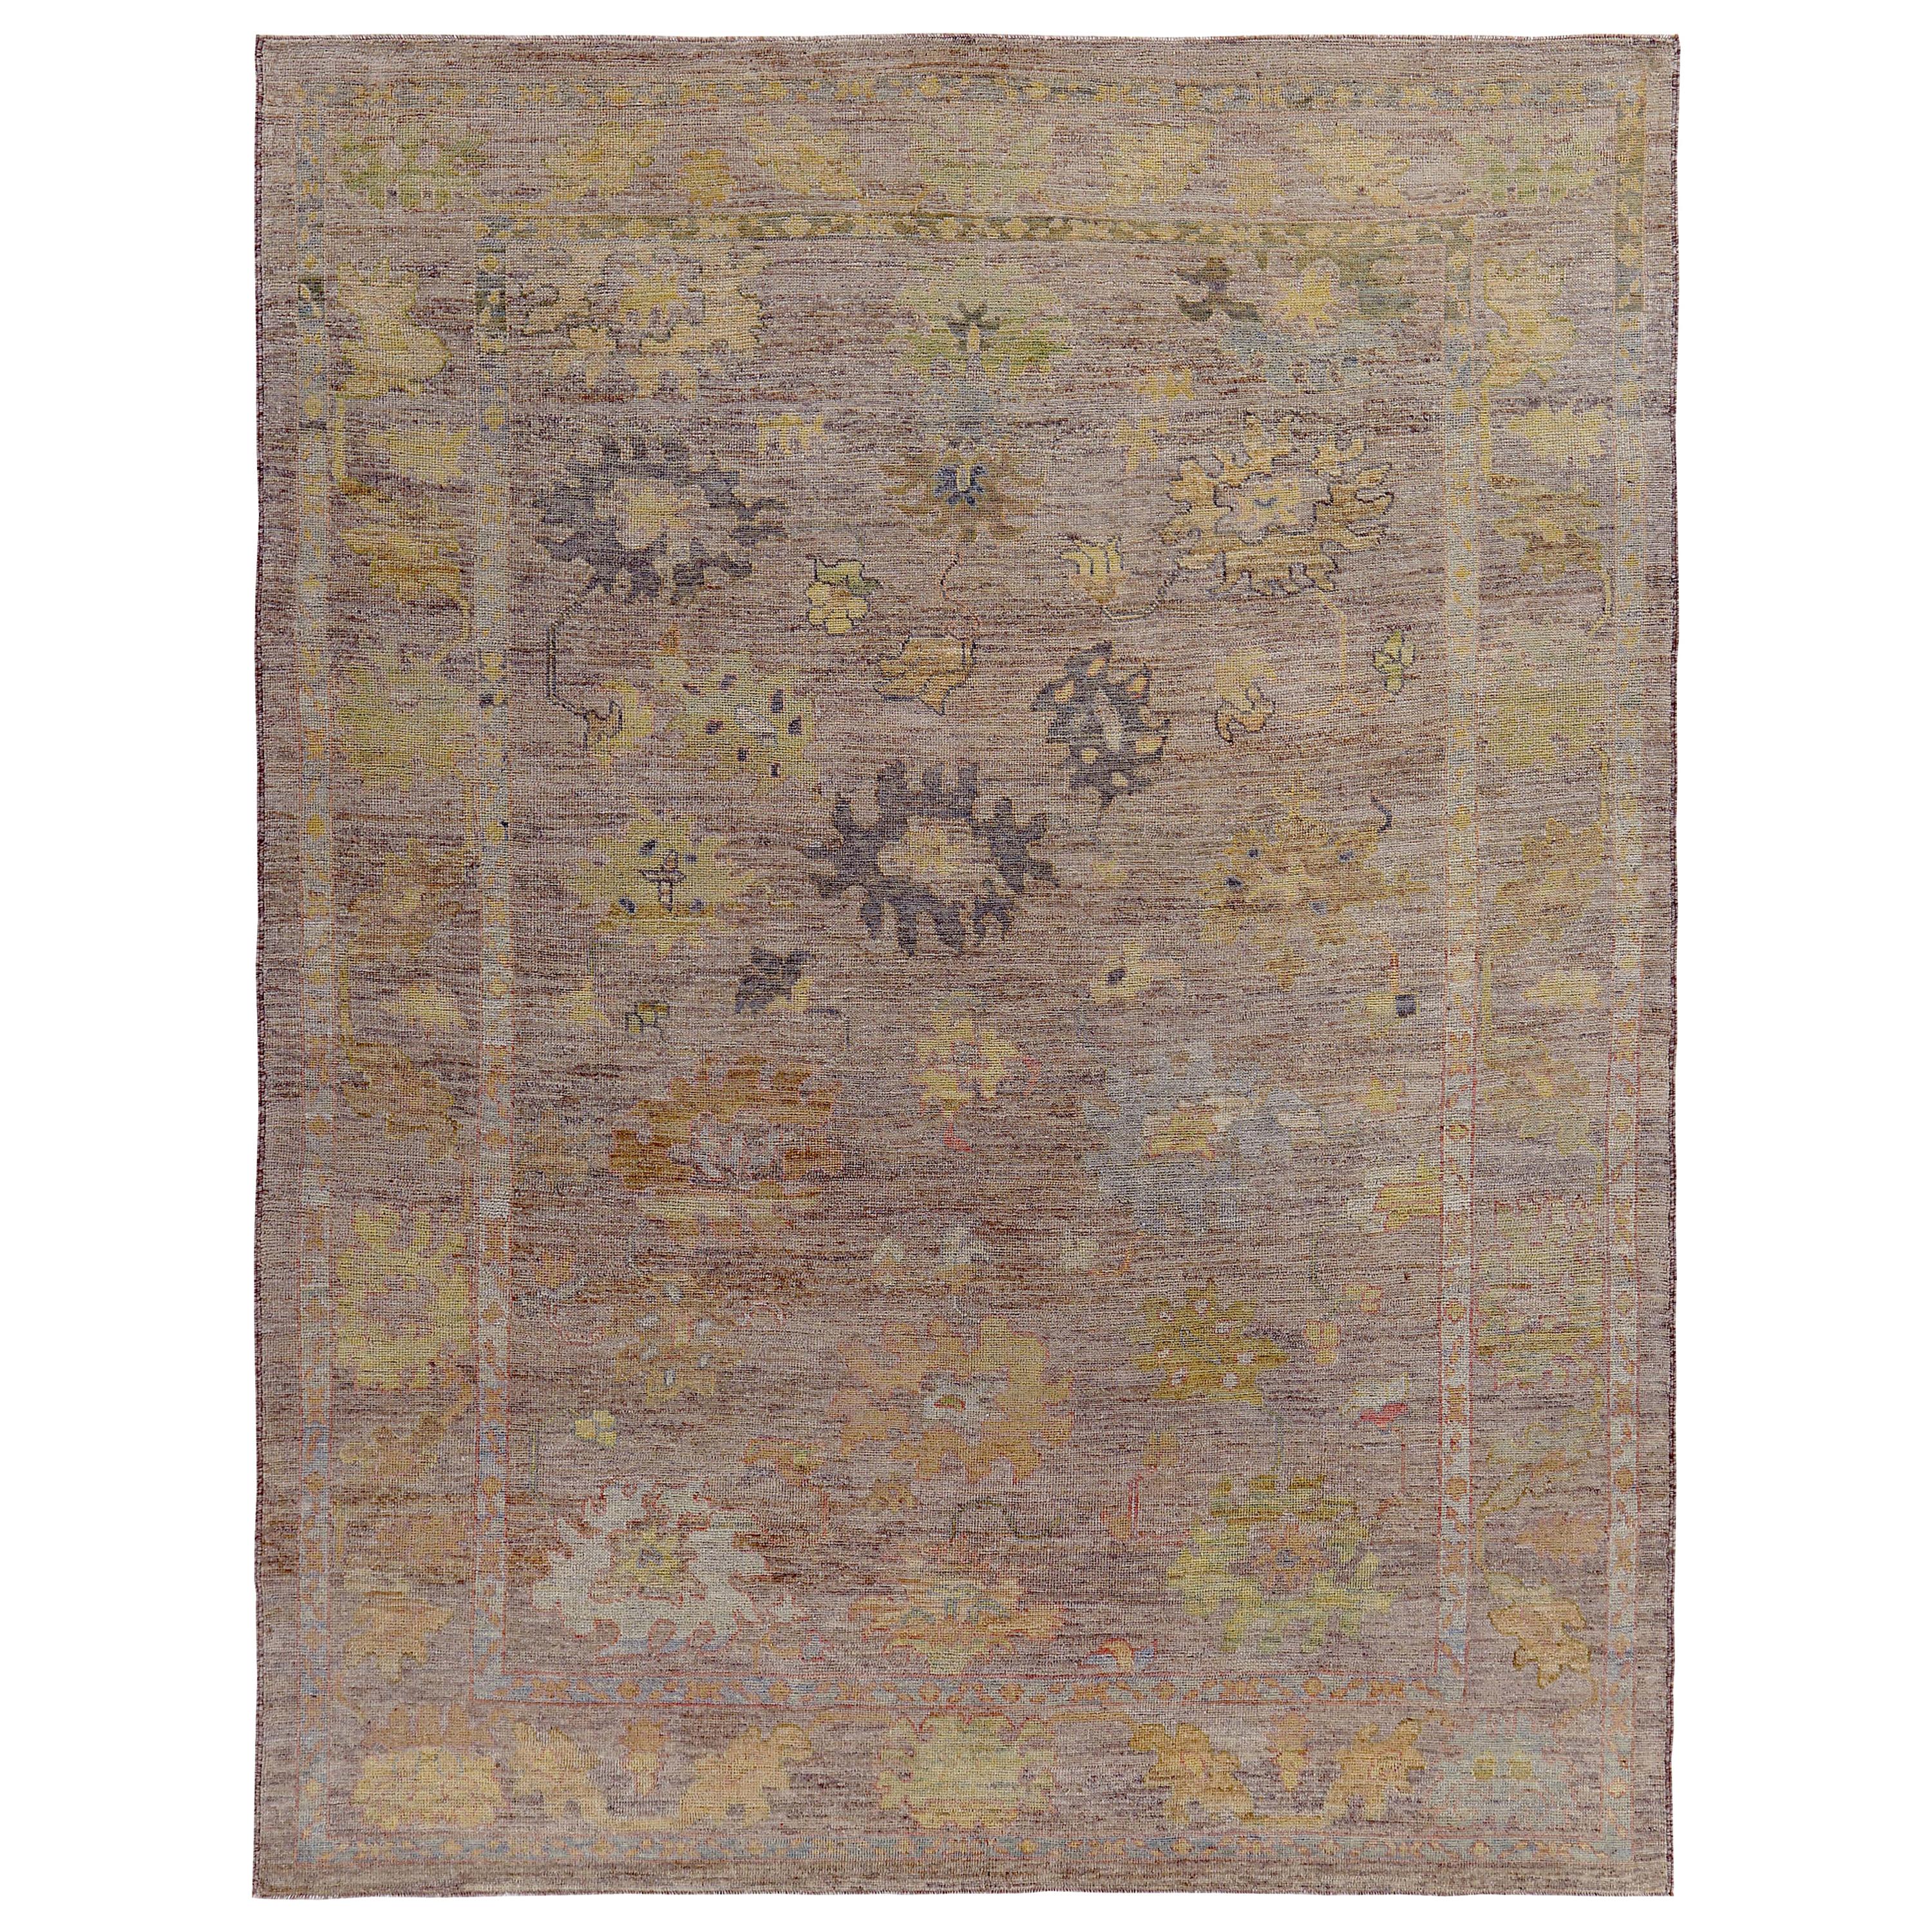 Turkish Oushak Rug with Yellow, Blue and Green Flower Heads on Brown Field